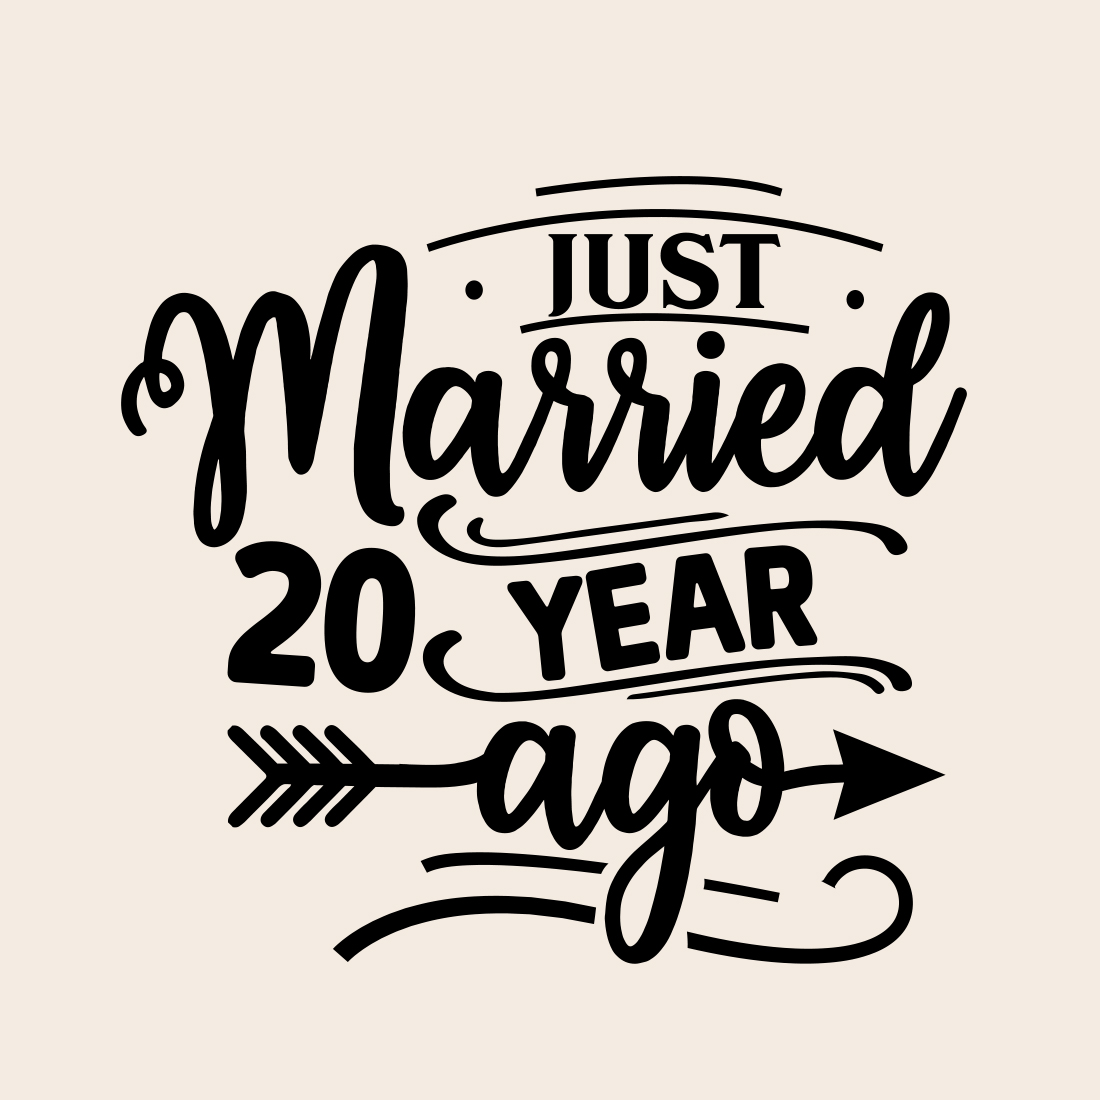 Just Married 20 Years Ago svg preview image.